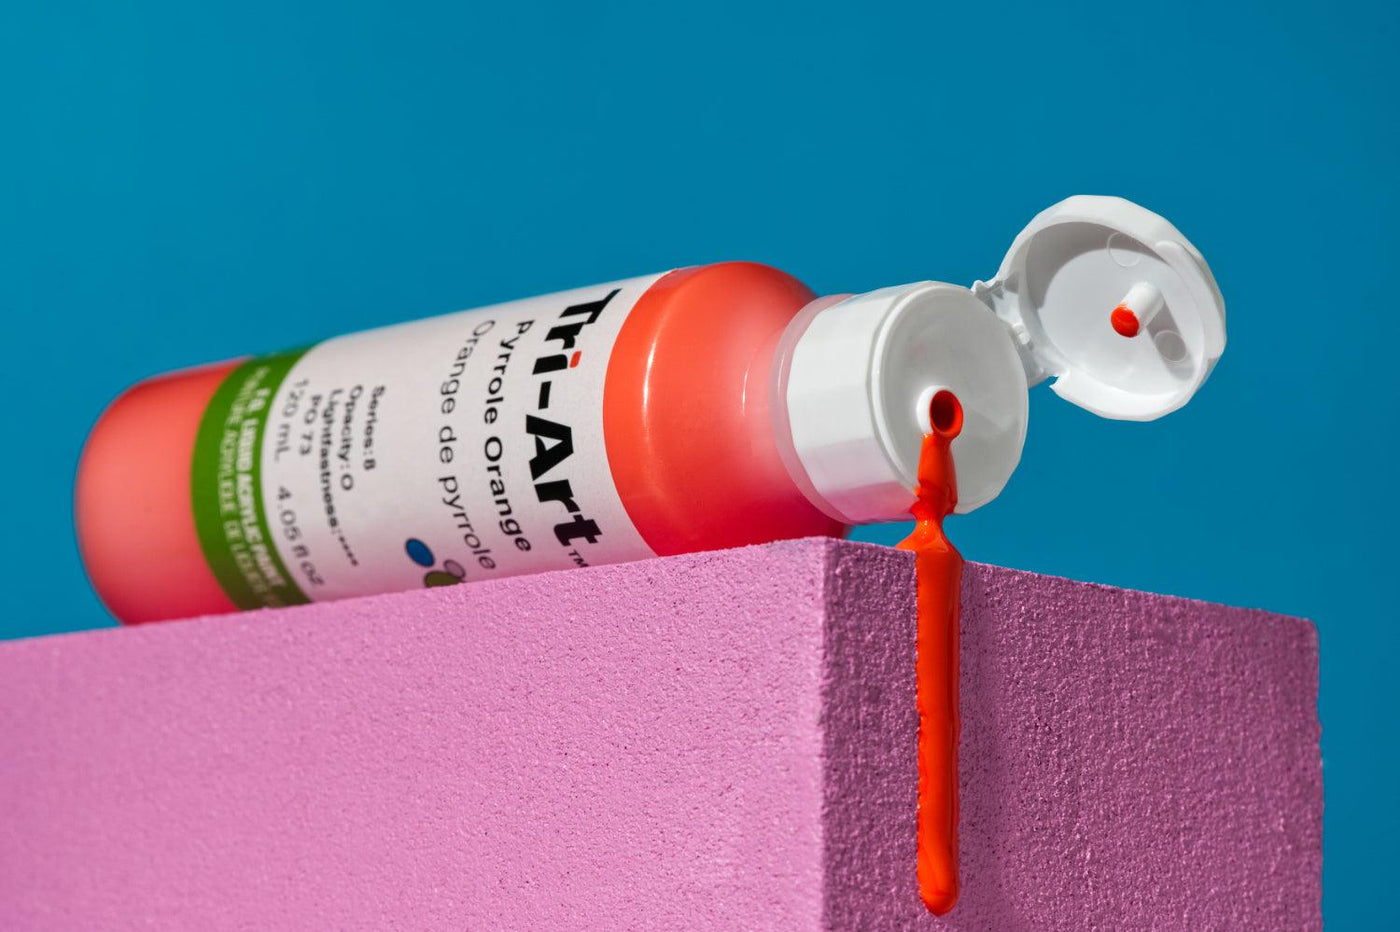 This is an image of an open cylinder of Pyrrole Orange paint from the Tri-Art Liquids professional acrylic paint line.